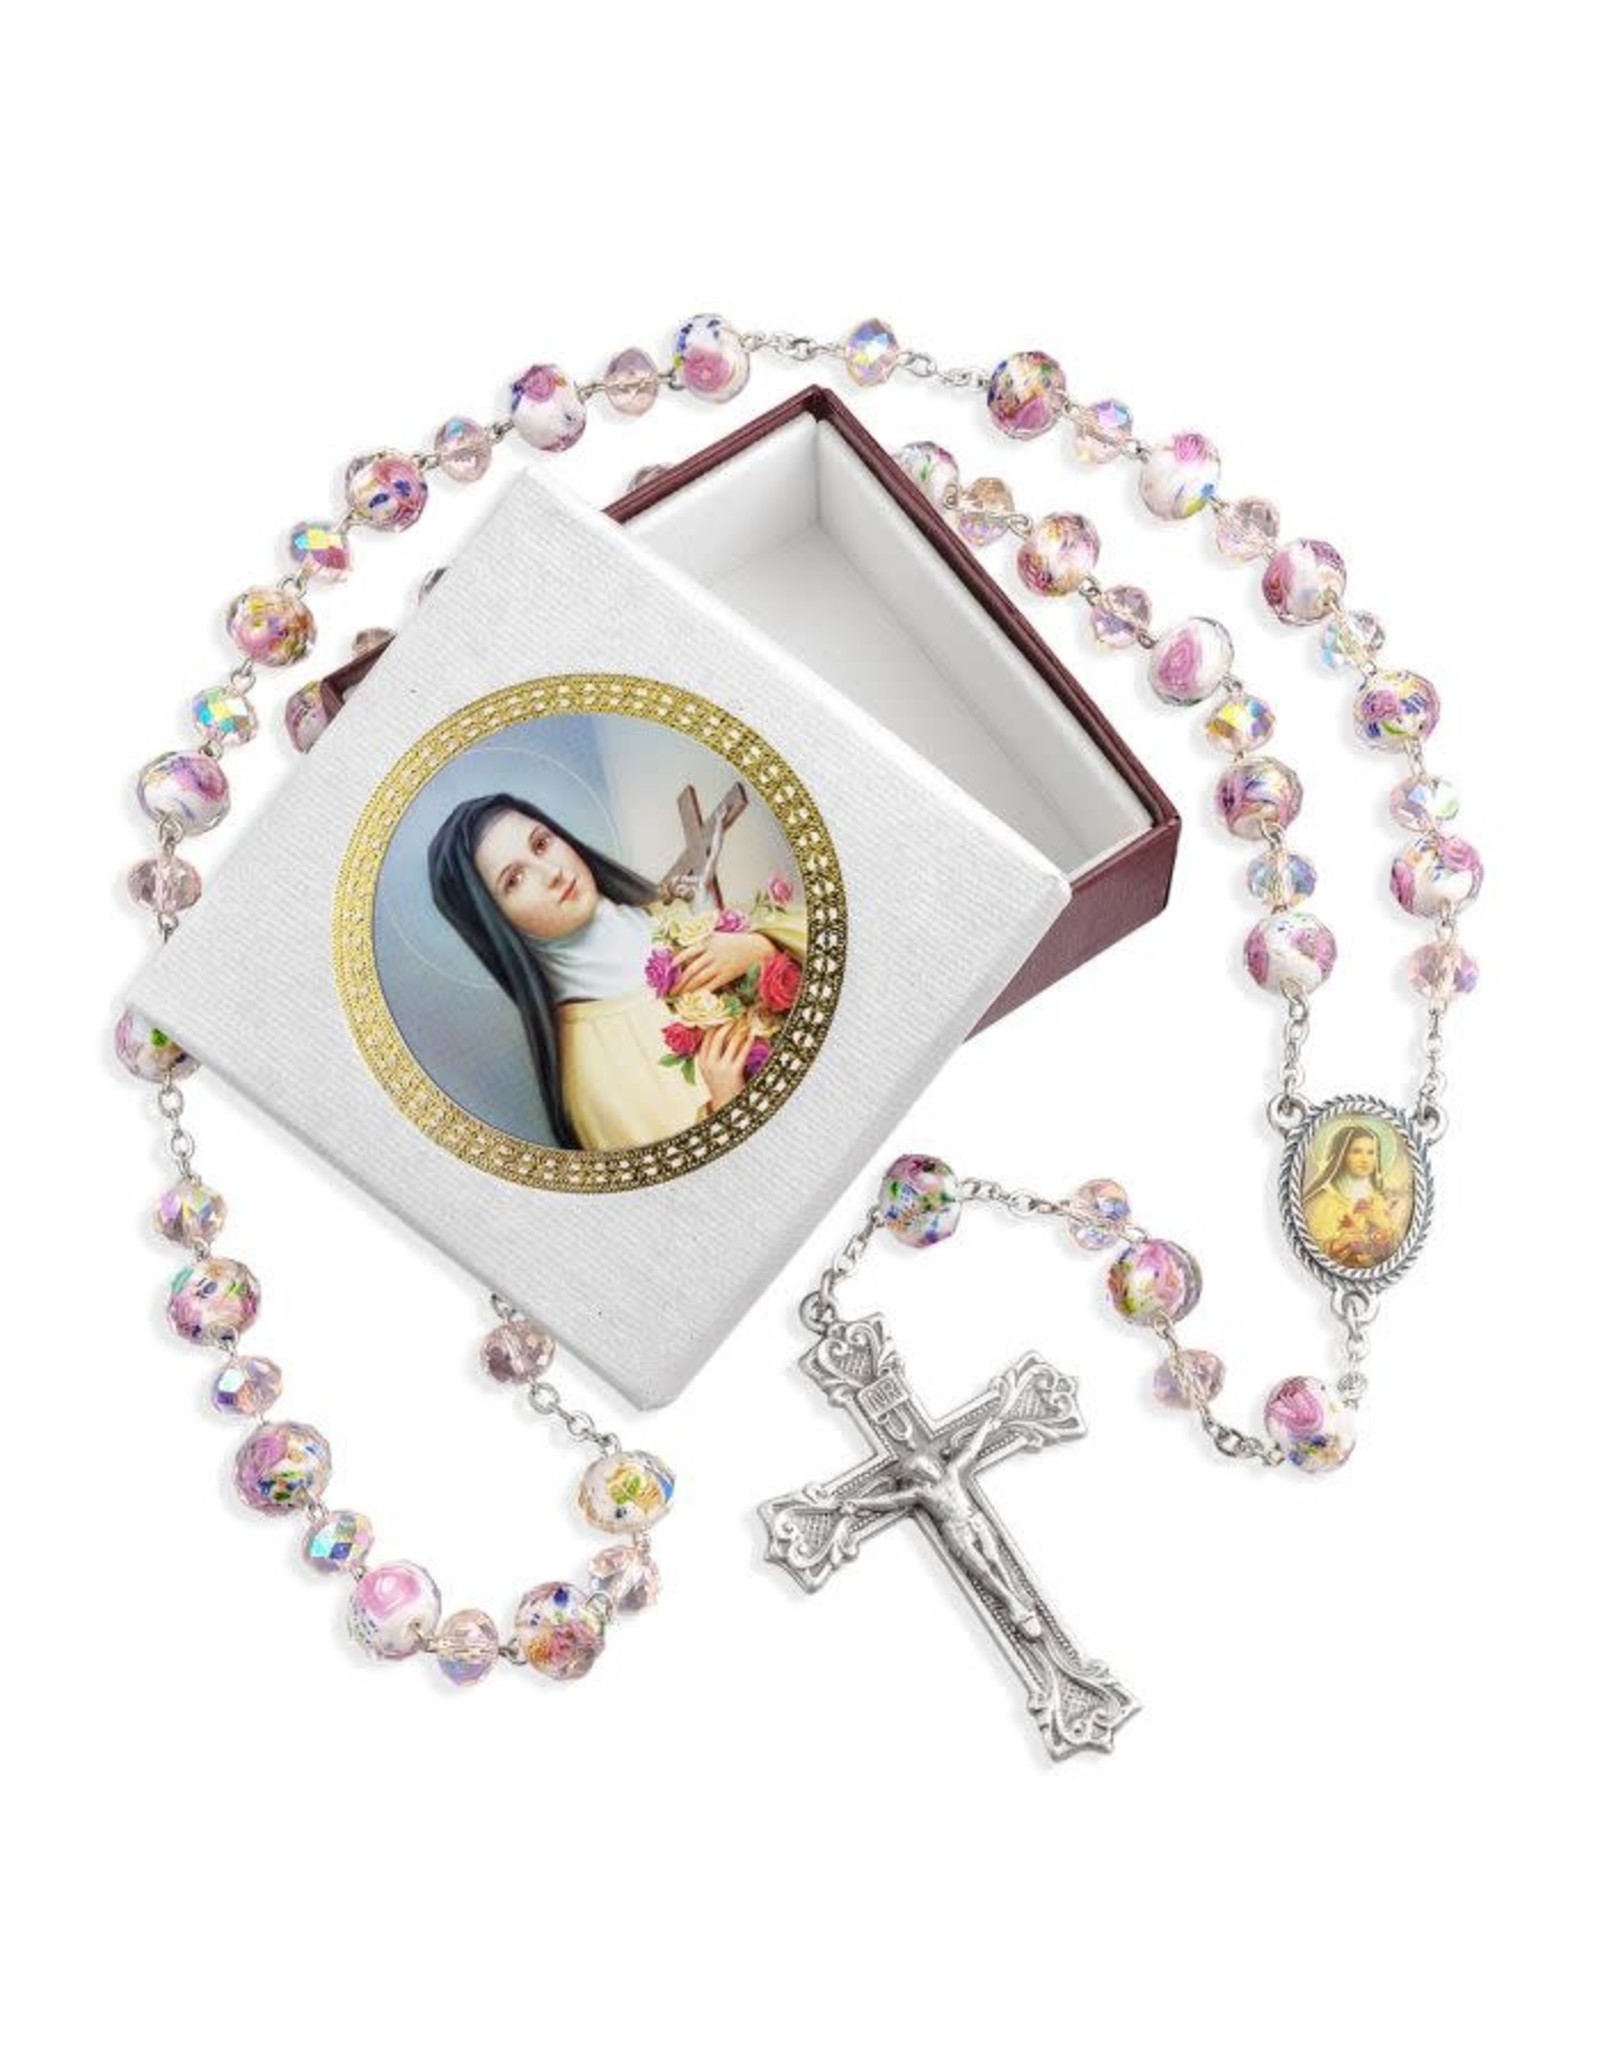 St. Therese Rosary with Handmade Floral Glass Beads with Box